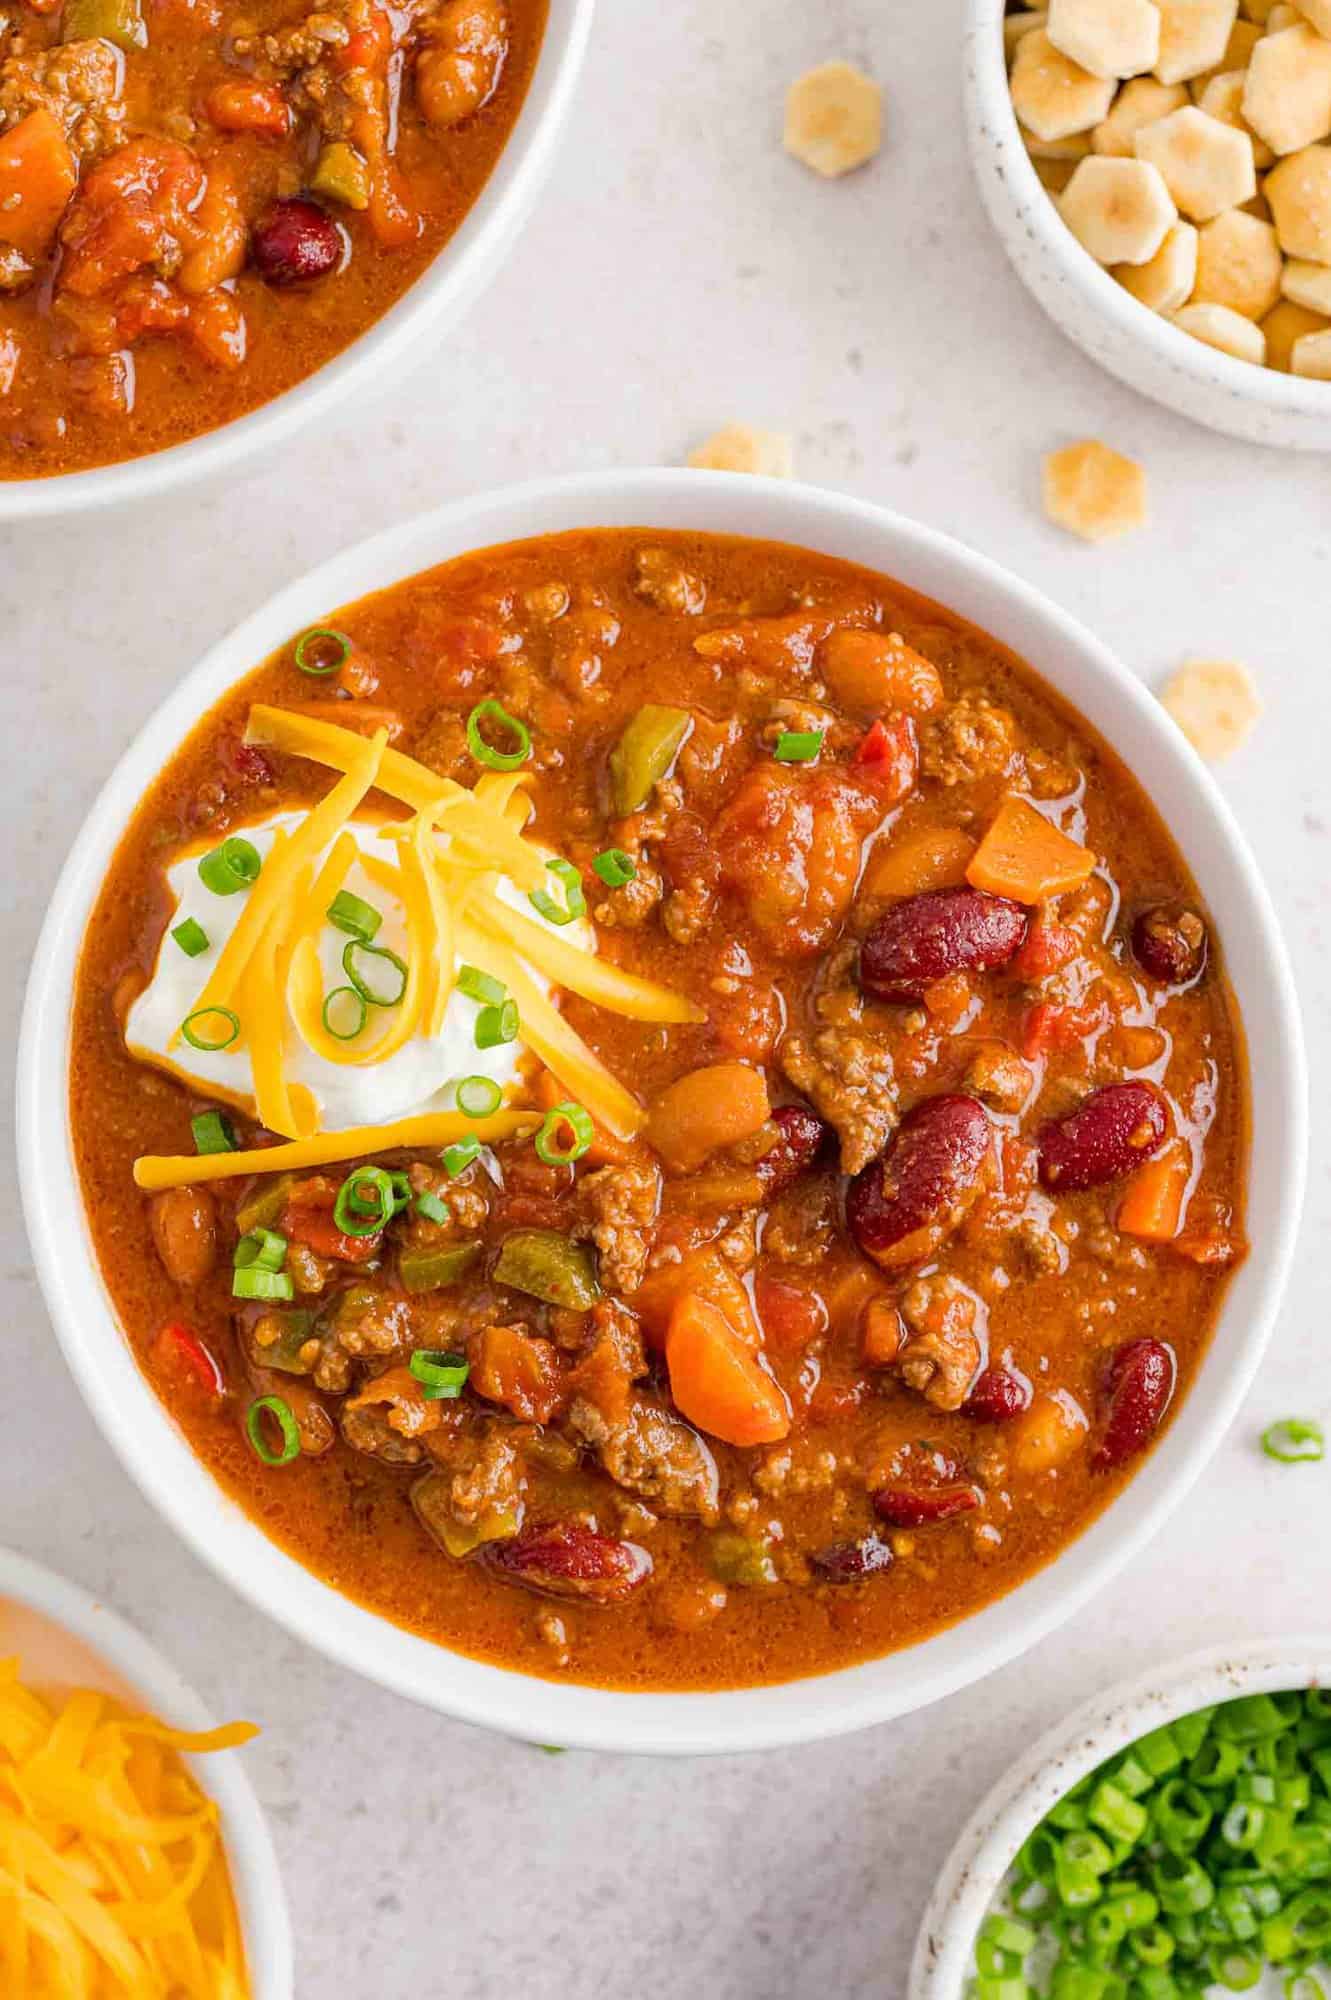 Beef chili with beans topped with cheese and sour cream.